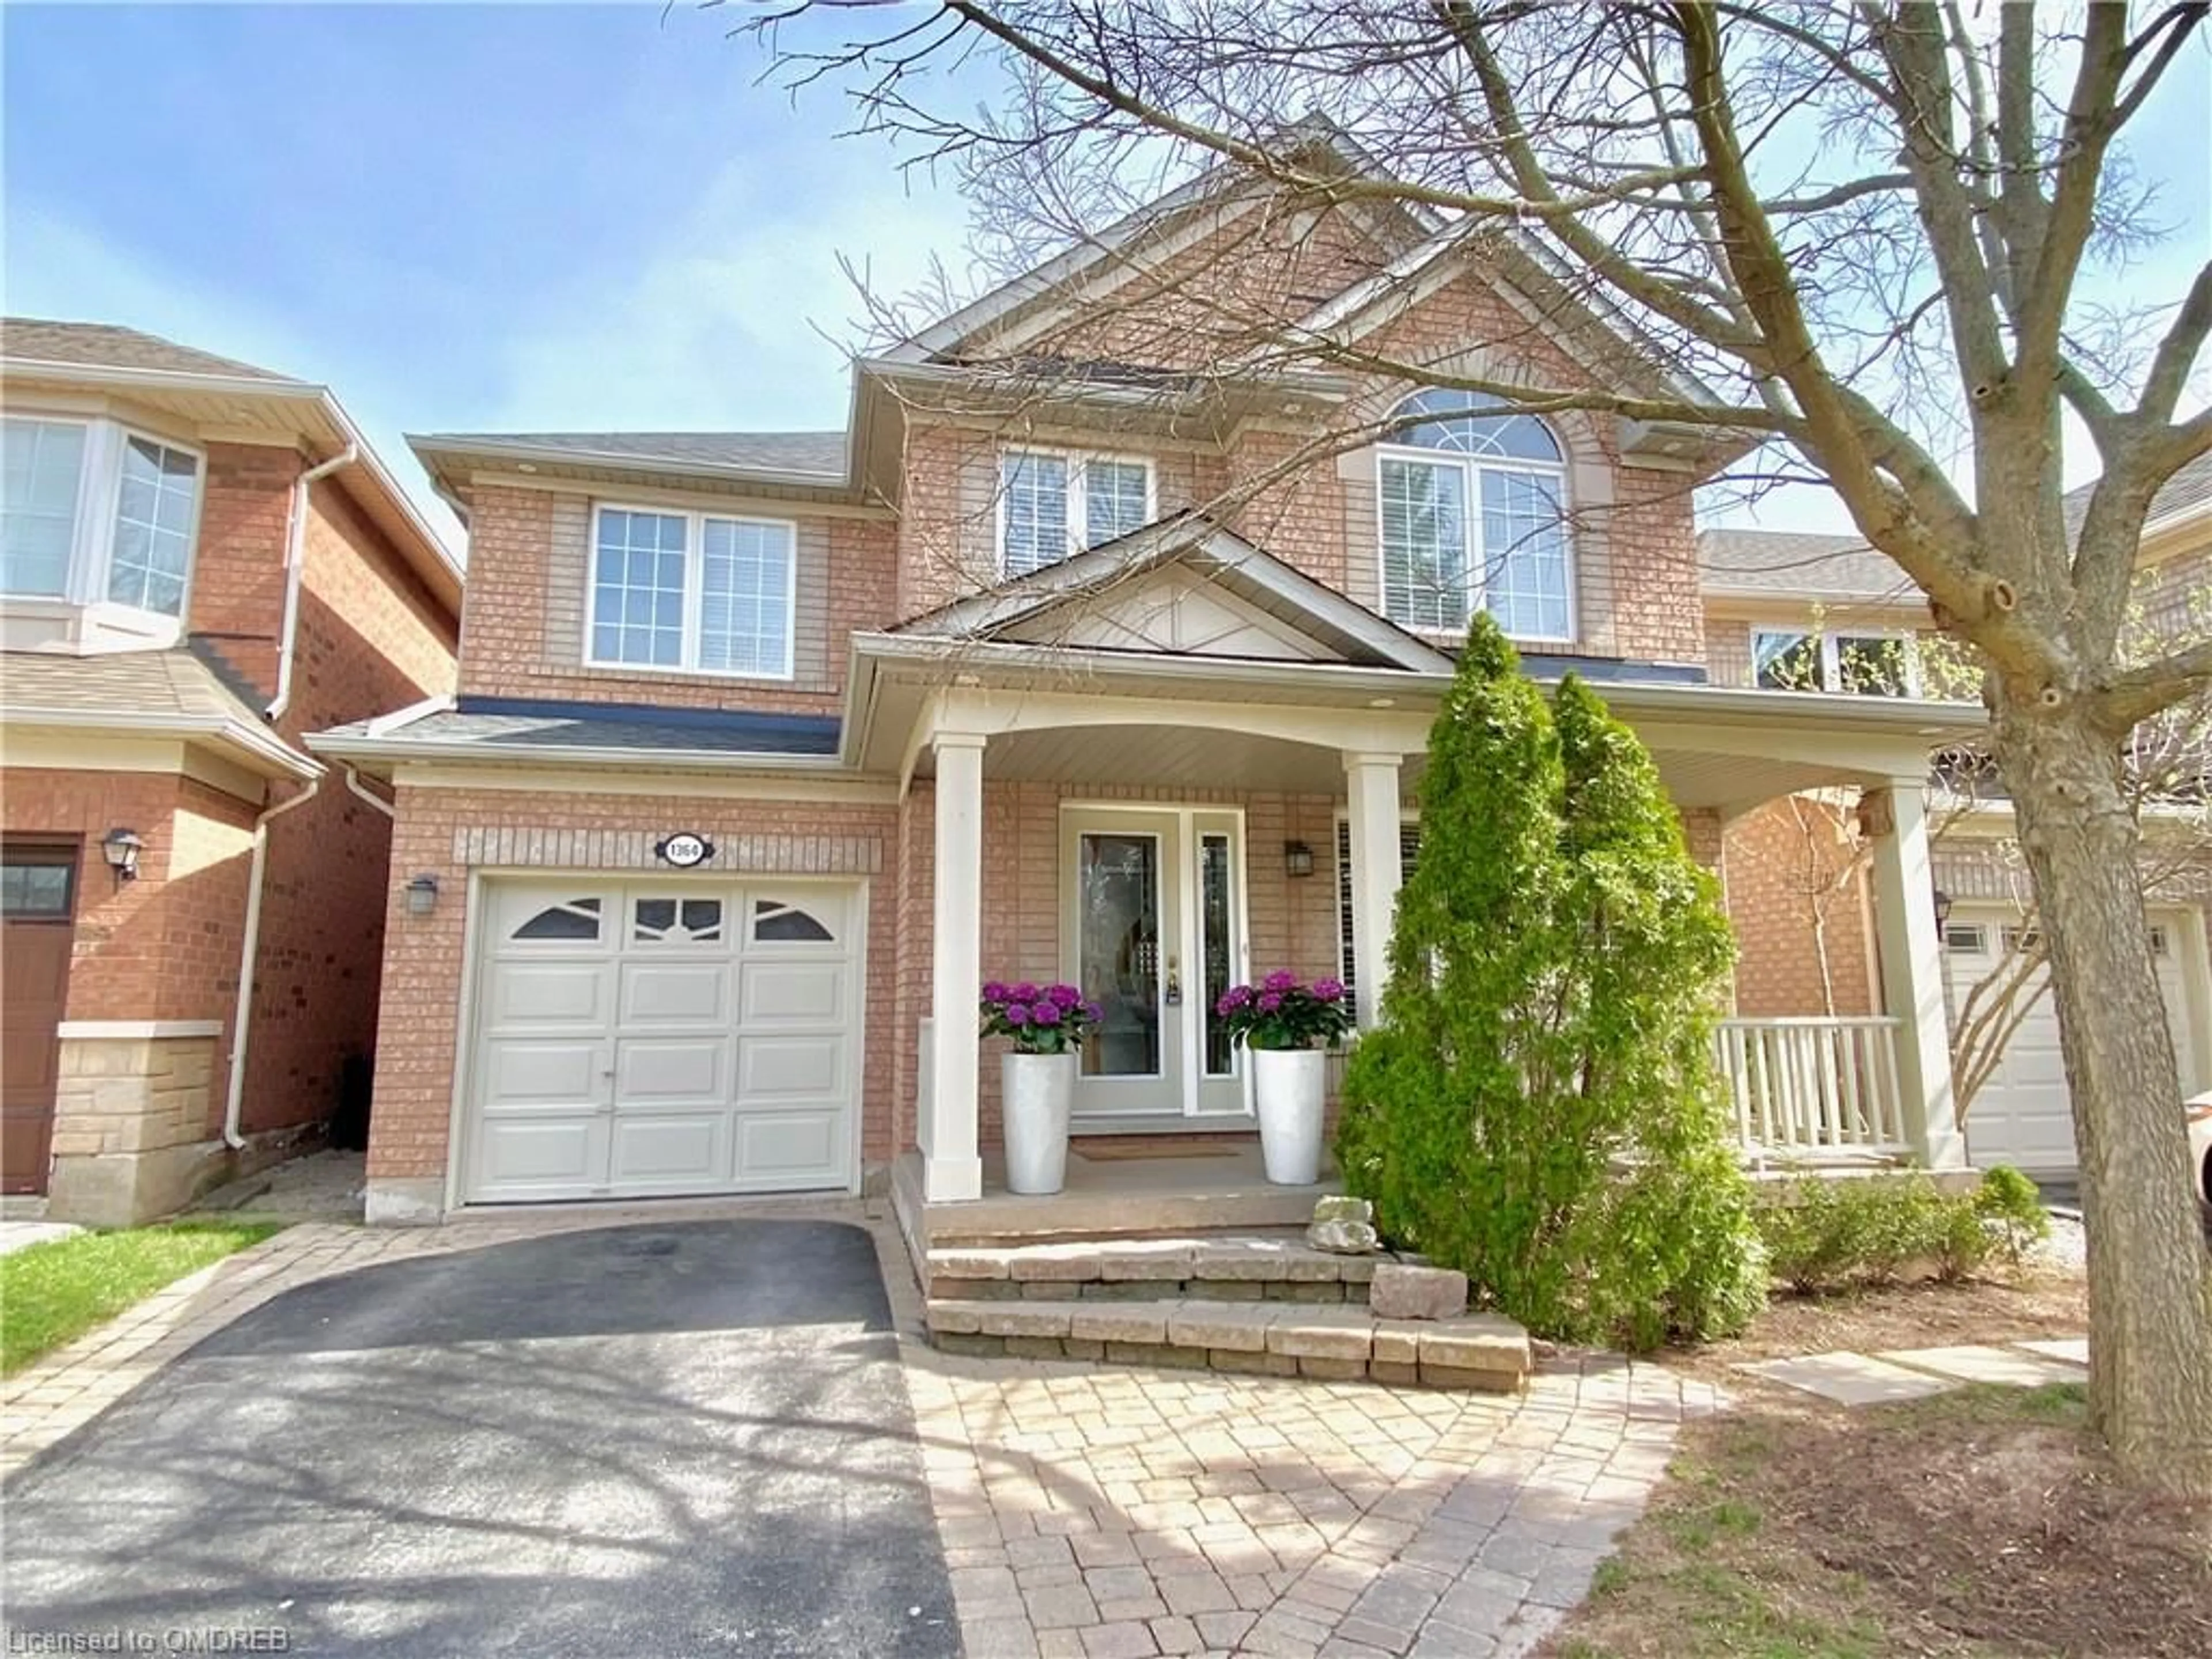 Home with brick exterior material for 1364 Glenrose Cres, Oakville Ontario L6M 3Y7